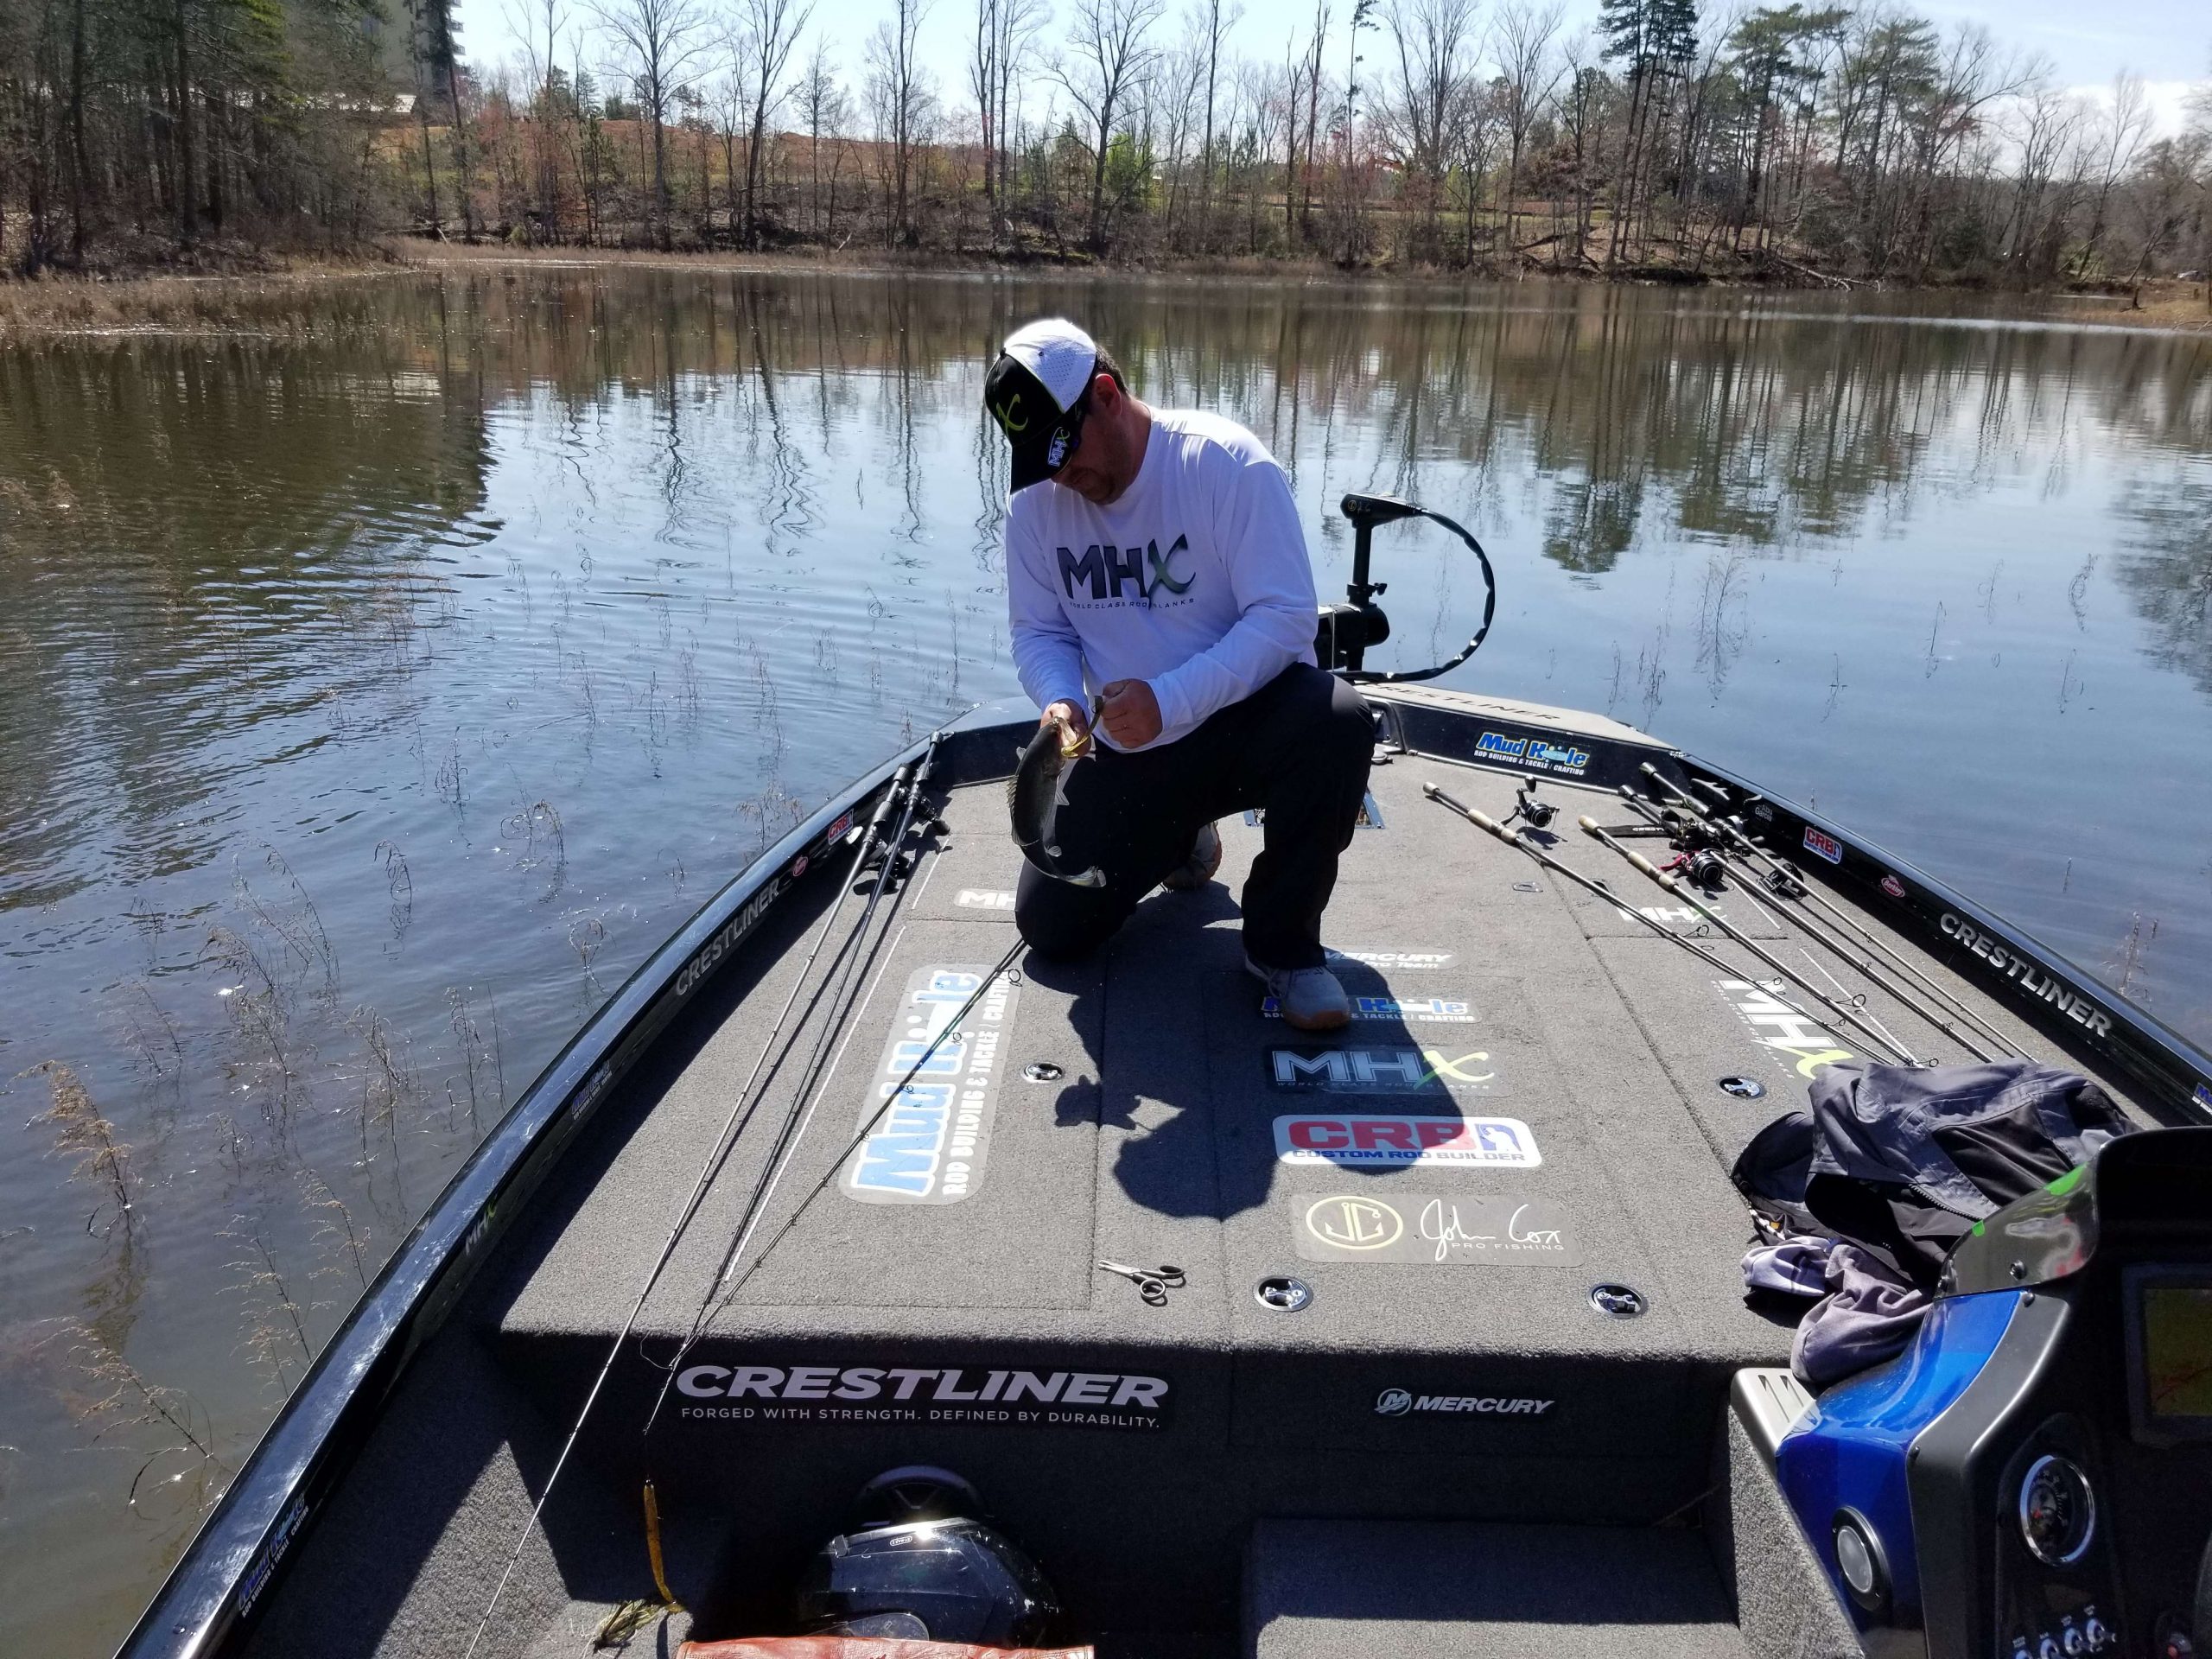 The fish are hotter, they are in the mood, and Cox is catching fish now...they are here, this should be interesting. He is playing with an 8-pounder now!